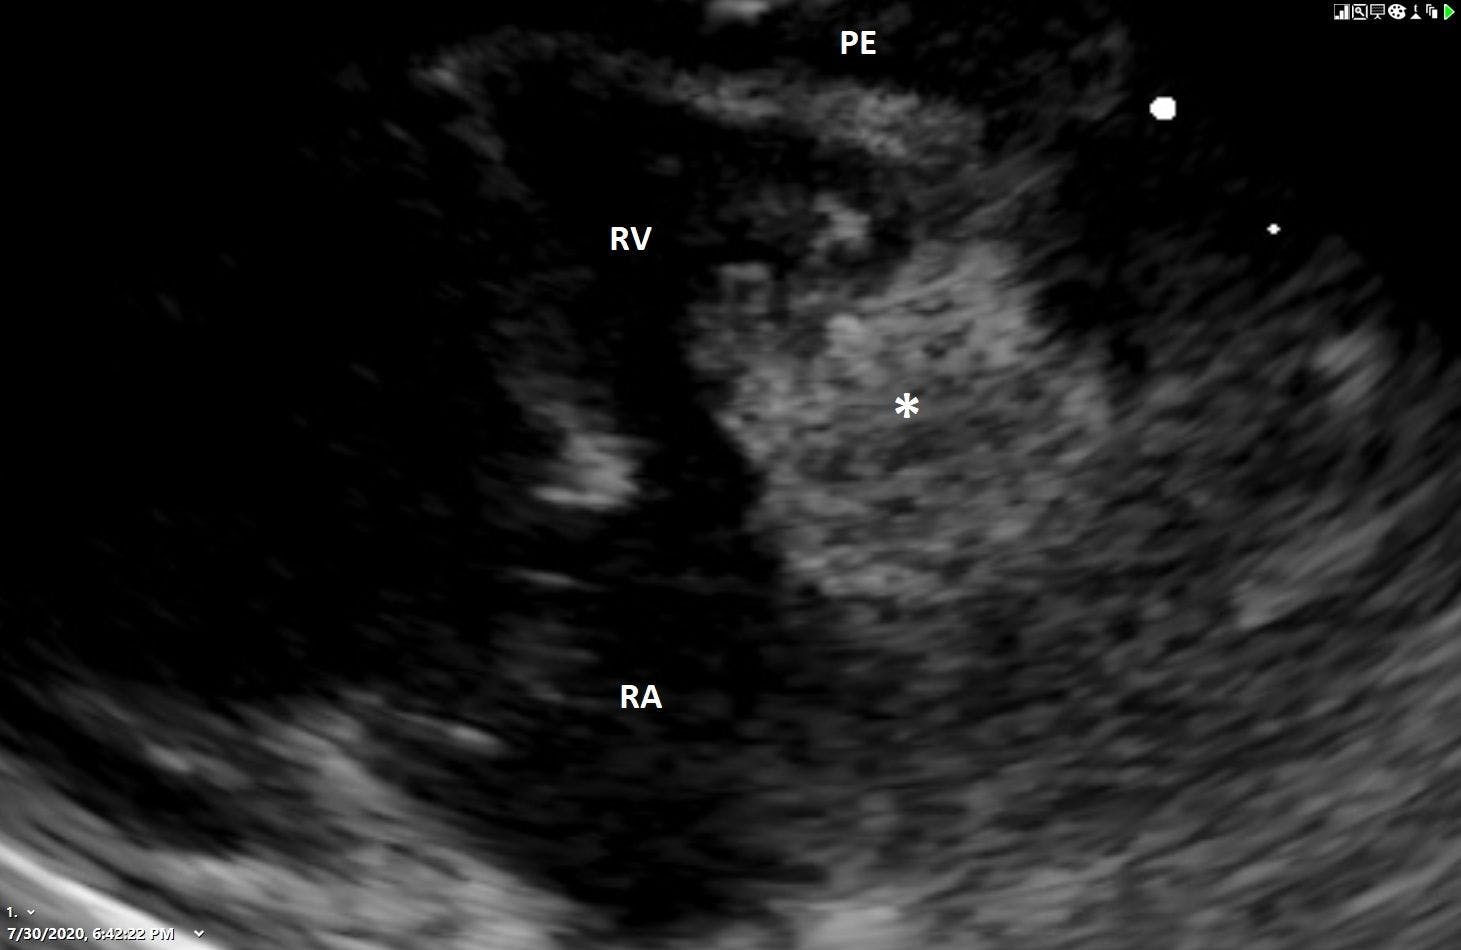 Figure 4. Left intercostal view of the right ventricle (RV) and atrium (RA) depicting the RV in the near field and the RA and atrial appendage in the far field. Trace pericardial effusion is visible as the anechoic stripe between the pericardium and RV. The asterisk indicates hyperechoic segmental thickening of the RV and atrial wall. The tentative diagnosis in this geriatric domestic shorthair cat was an extranodal lymphoma. Pericardial fluid analysis may have provided cytologic evidence of this tumor, but it was not attempted due to the scant volume.